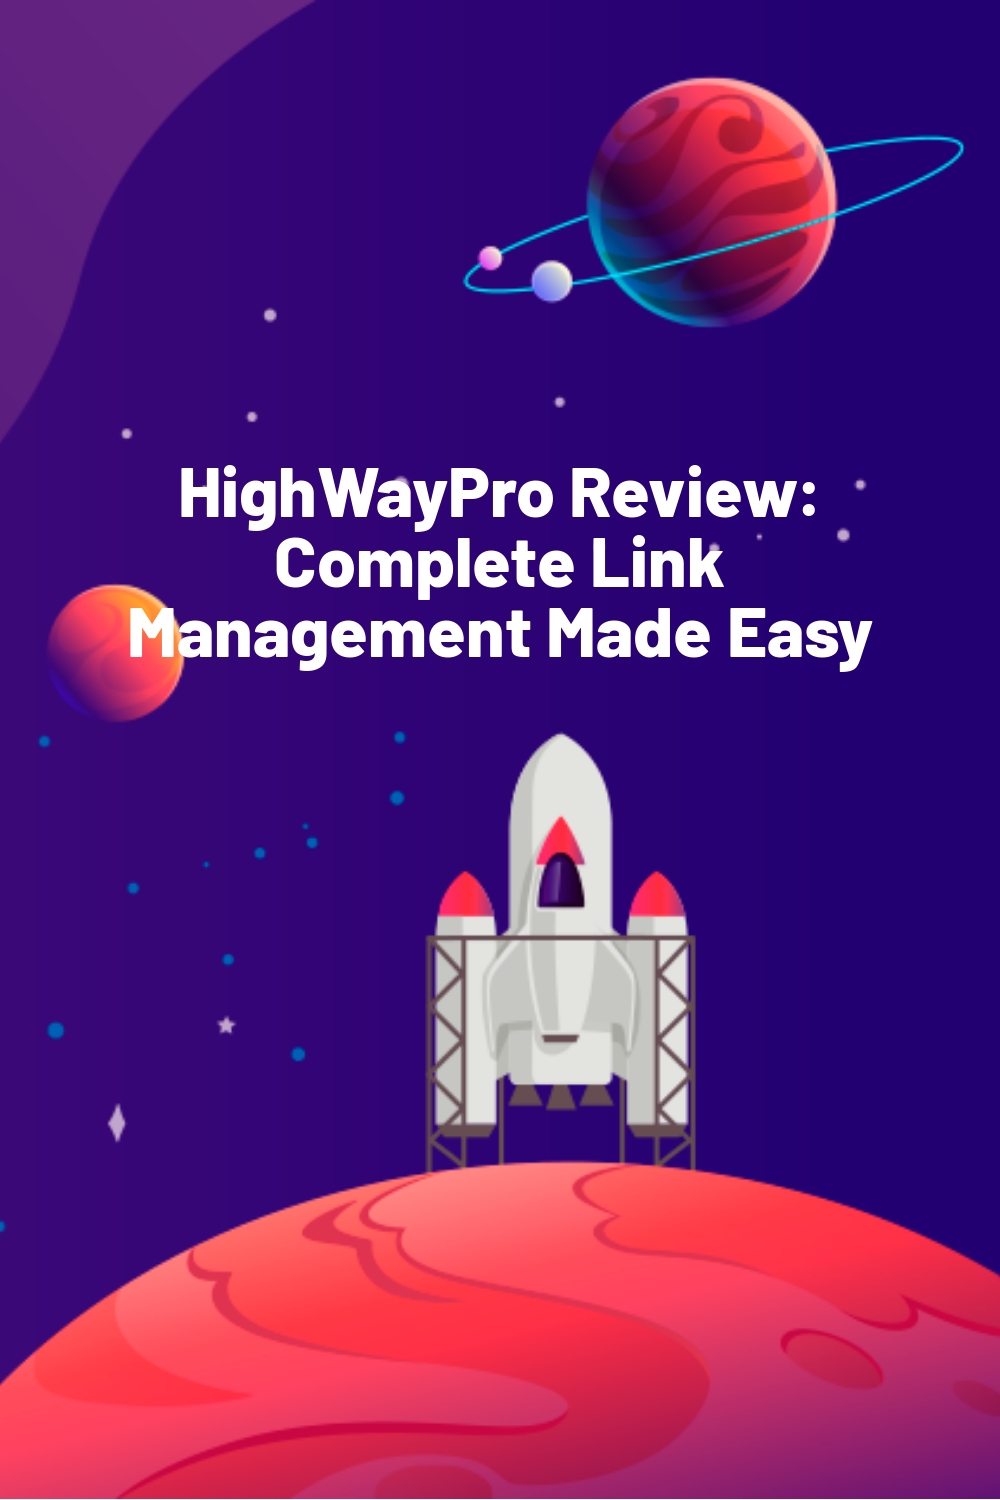 HighWayPro Review: Complete Link Management Made Easy